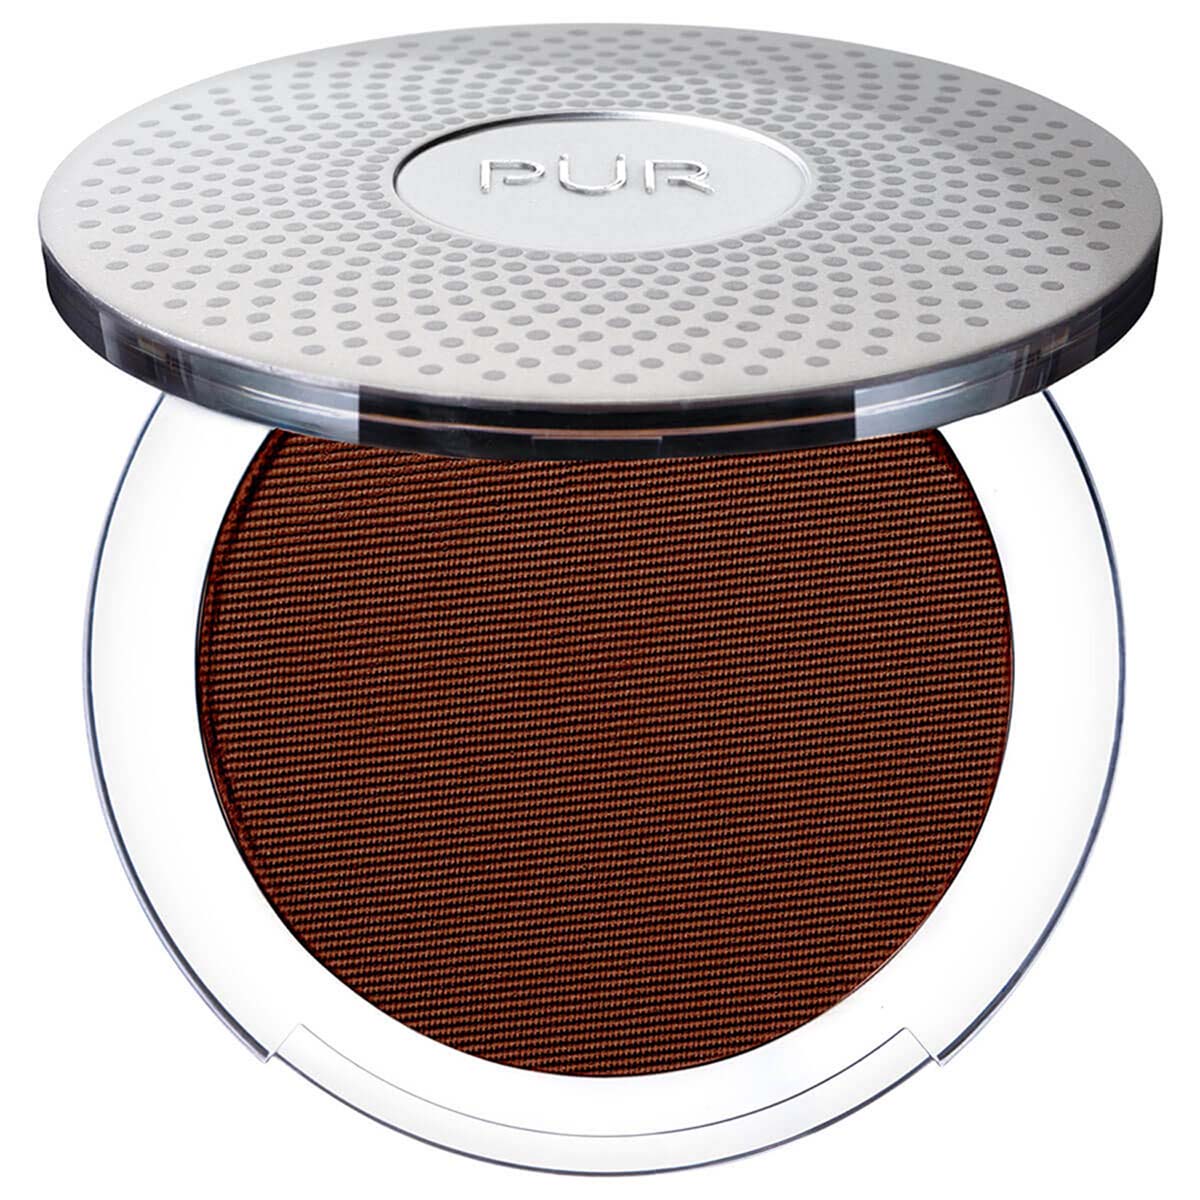 Pur 4 In 1 Pressed Mineral Makeup 8G Truffle/Dpp4